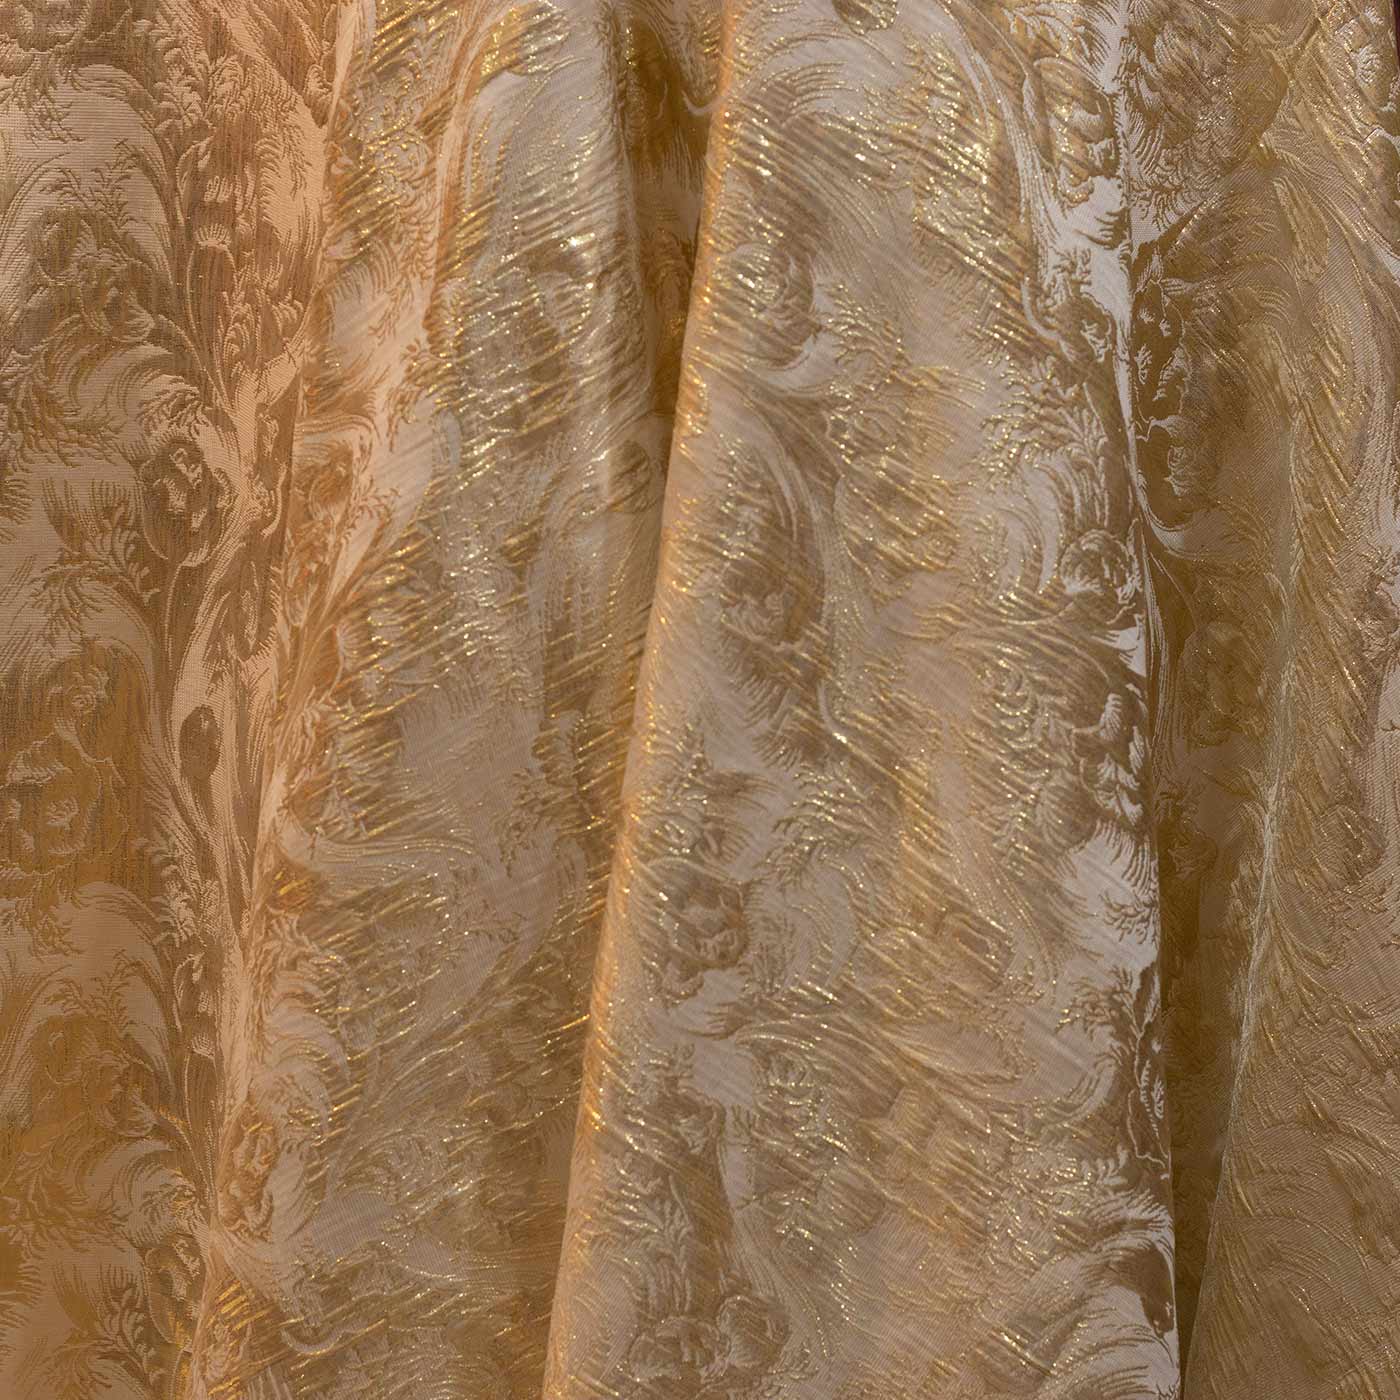 Champaign Gold Abstract Floral Brocade Fabric